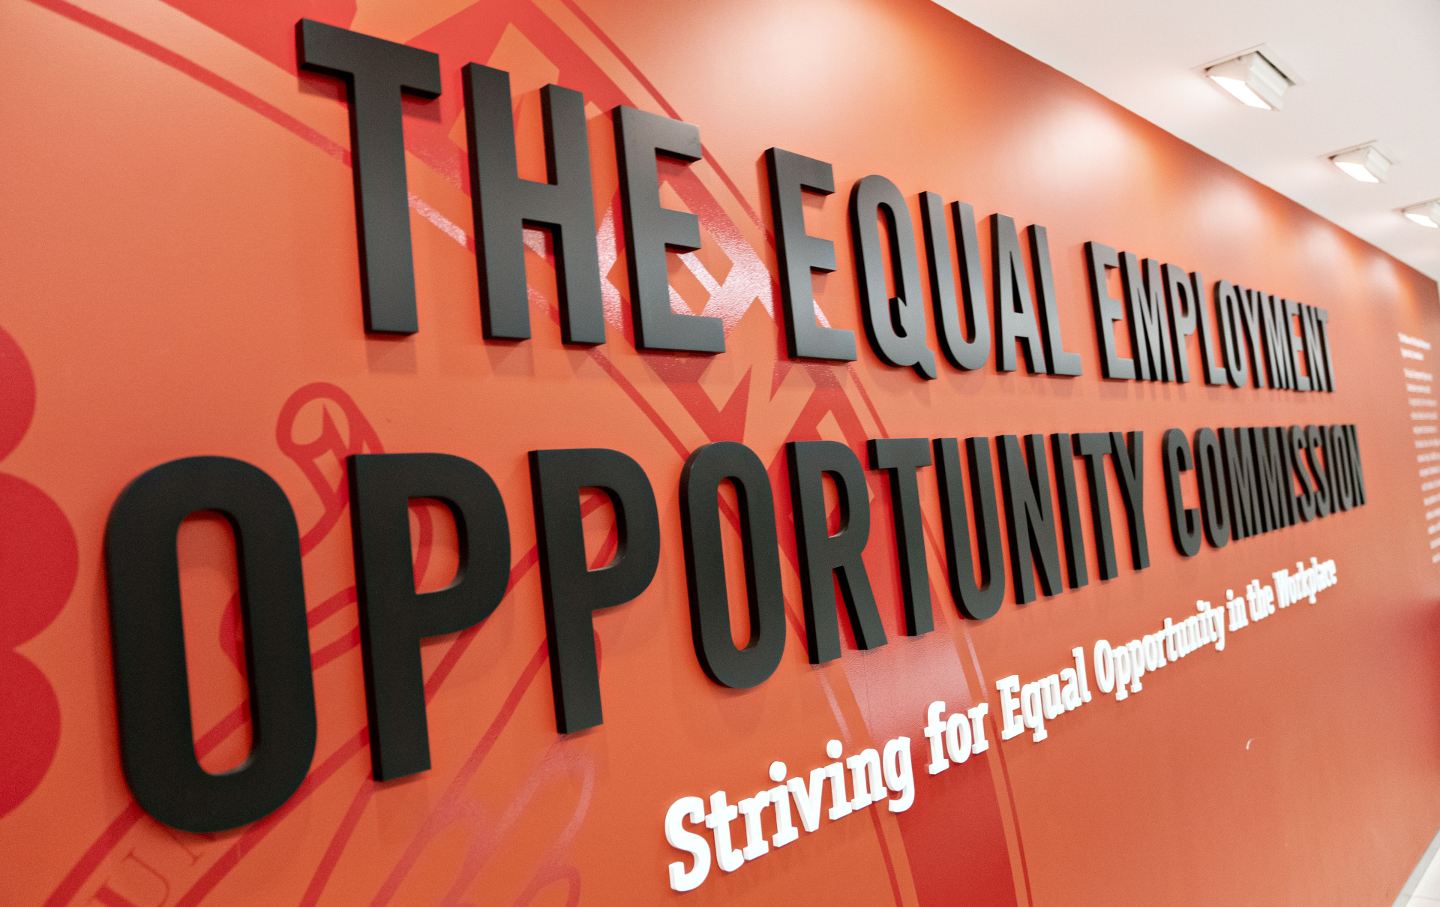 A wall at entrance of the Equal Employment Opportunity Commission, with the agency's name in large type and below that 